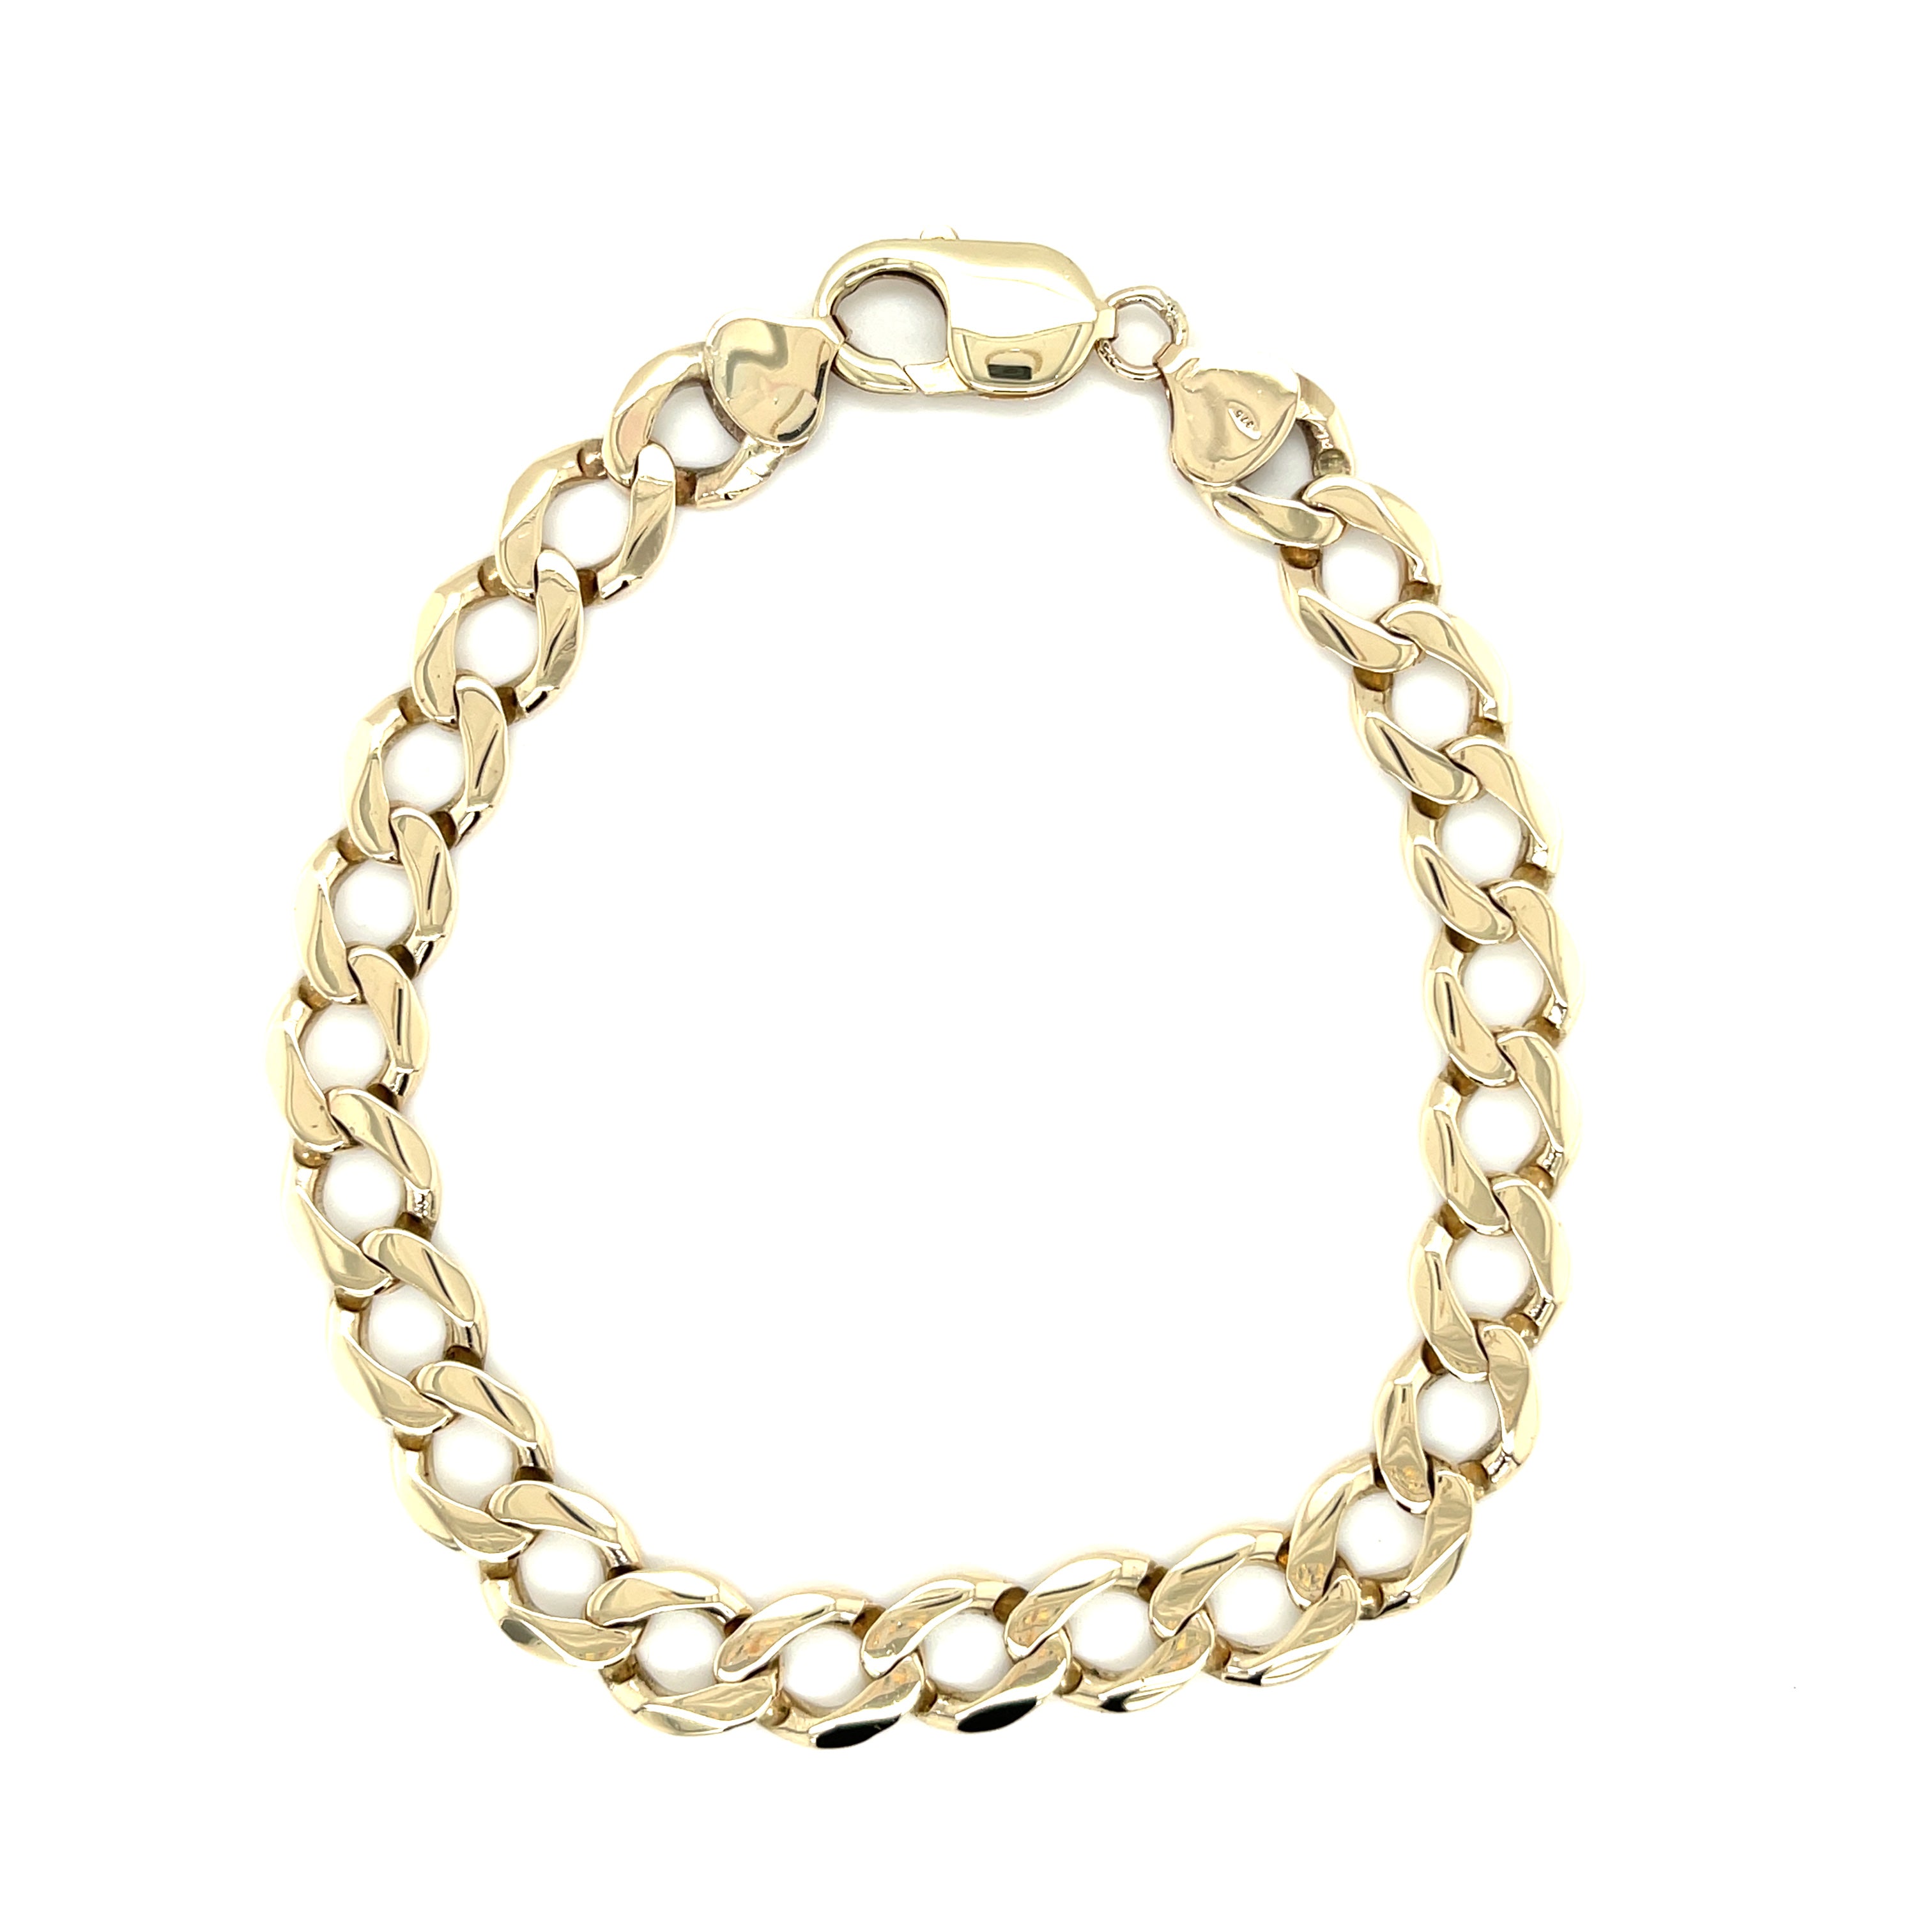 9ct Yellow Gold 9.5 Inch Curb Link Bracelet - 21.82g